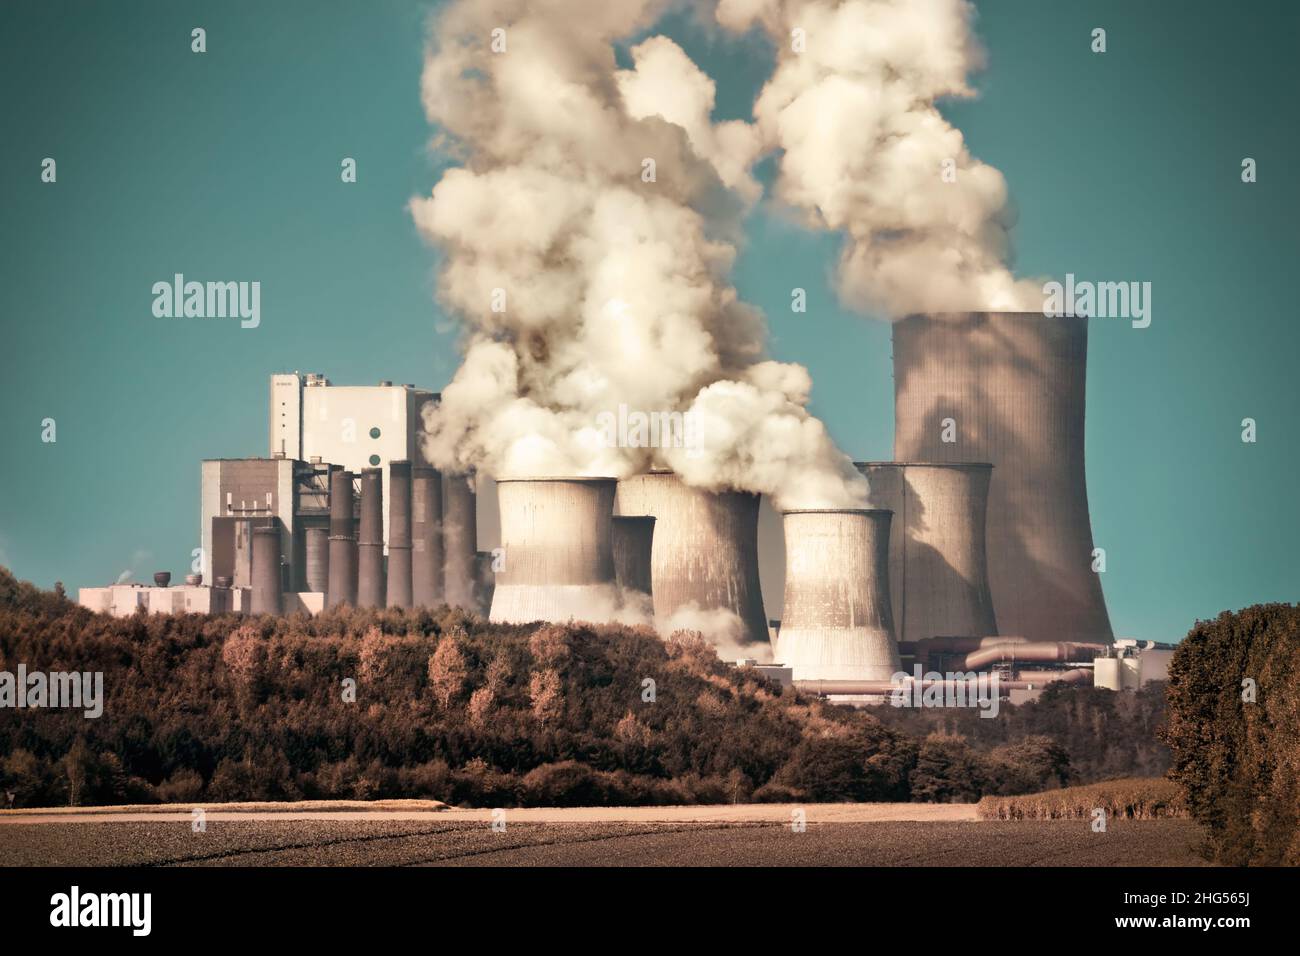 Large coal power plant with steam and smoke on teal sky, dramatic look Stock Photo